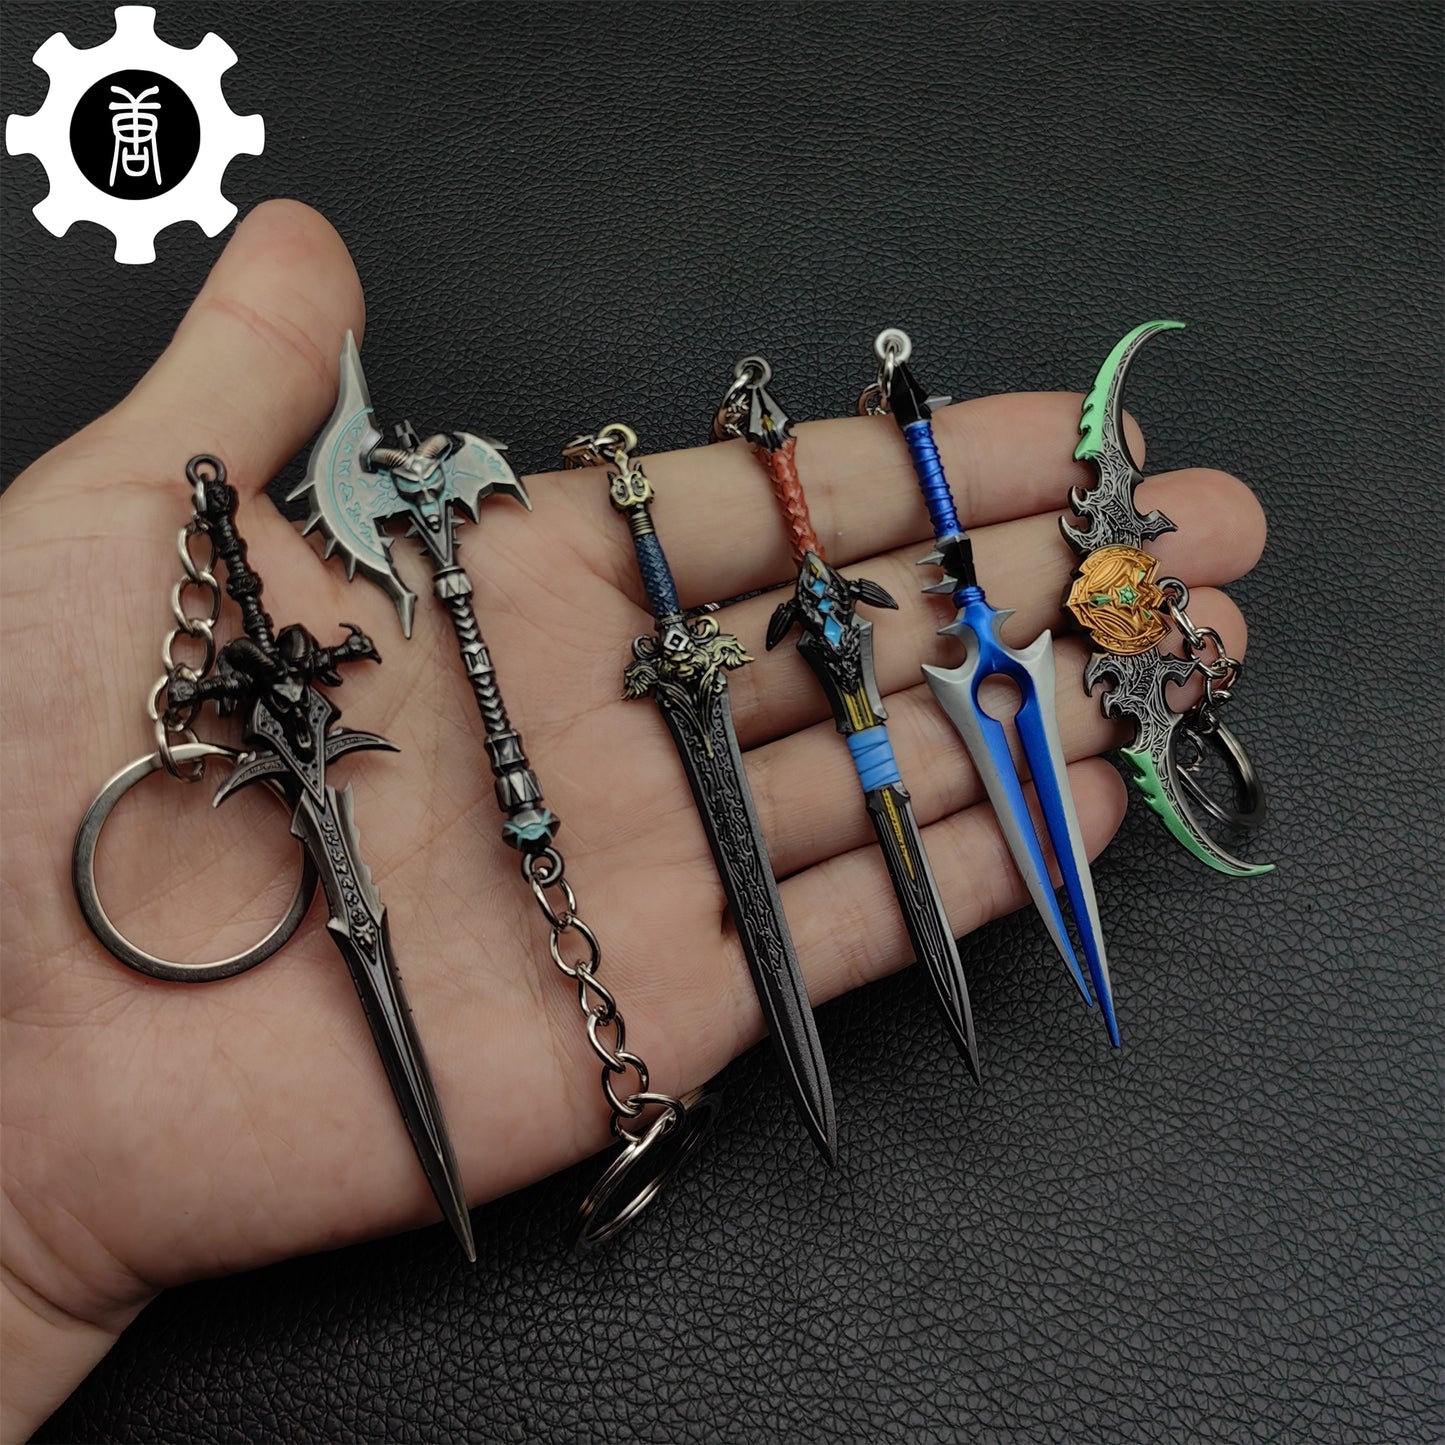 WOW Metal Mini Weapons Keychain Pendant 6 In 1 Pack